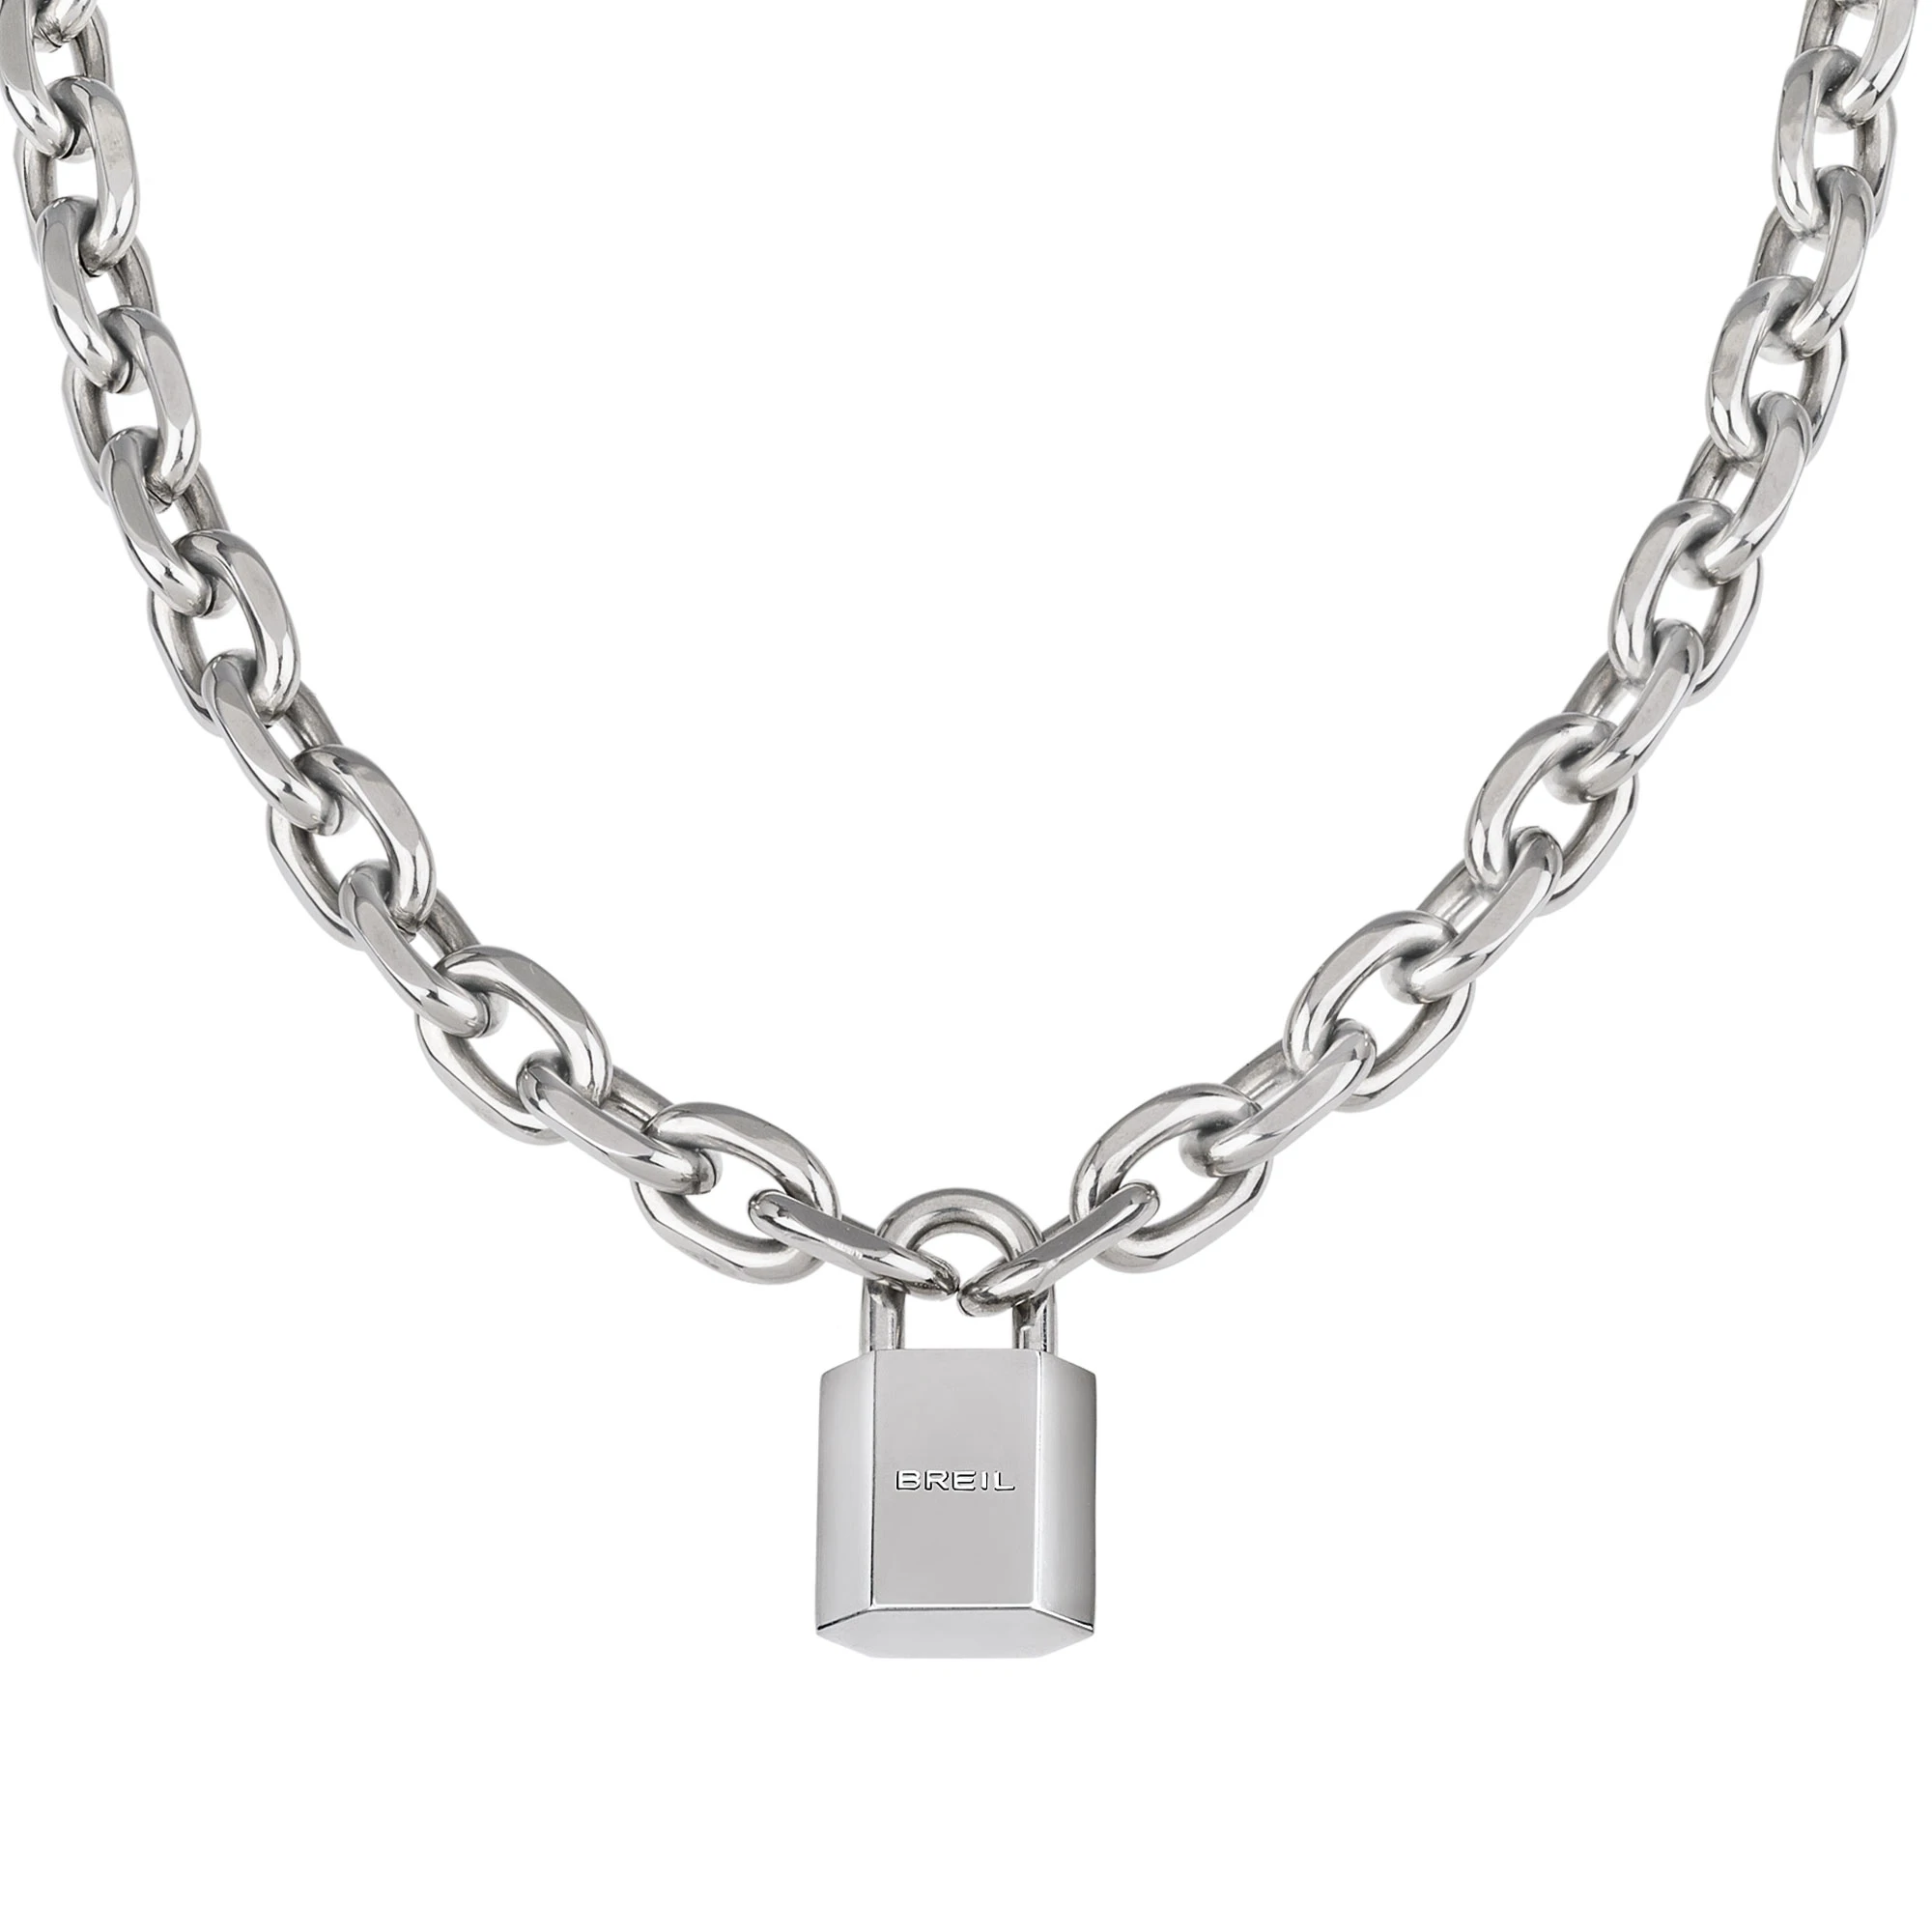 PROMISE - STAINLESS STEEL NECKLACE - 1 - TJ3078 | Breil